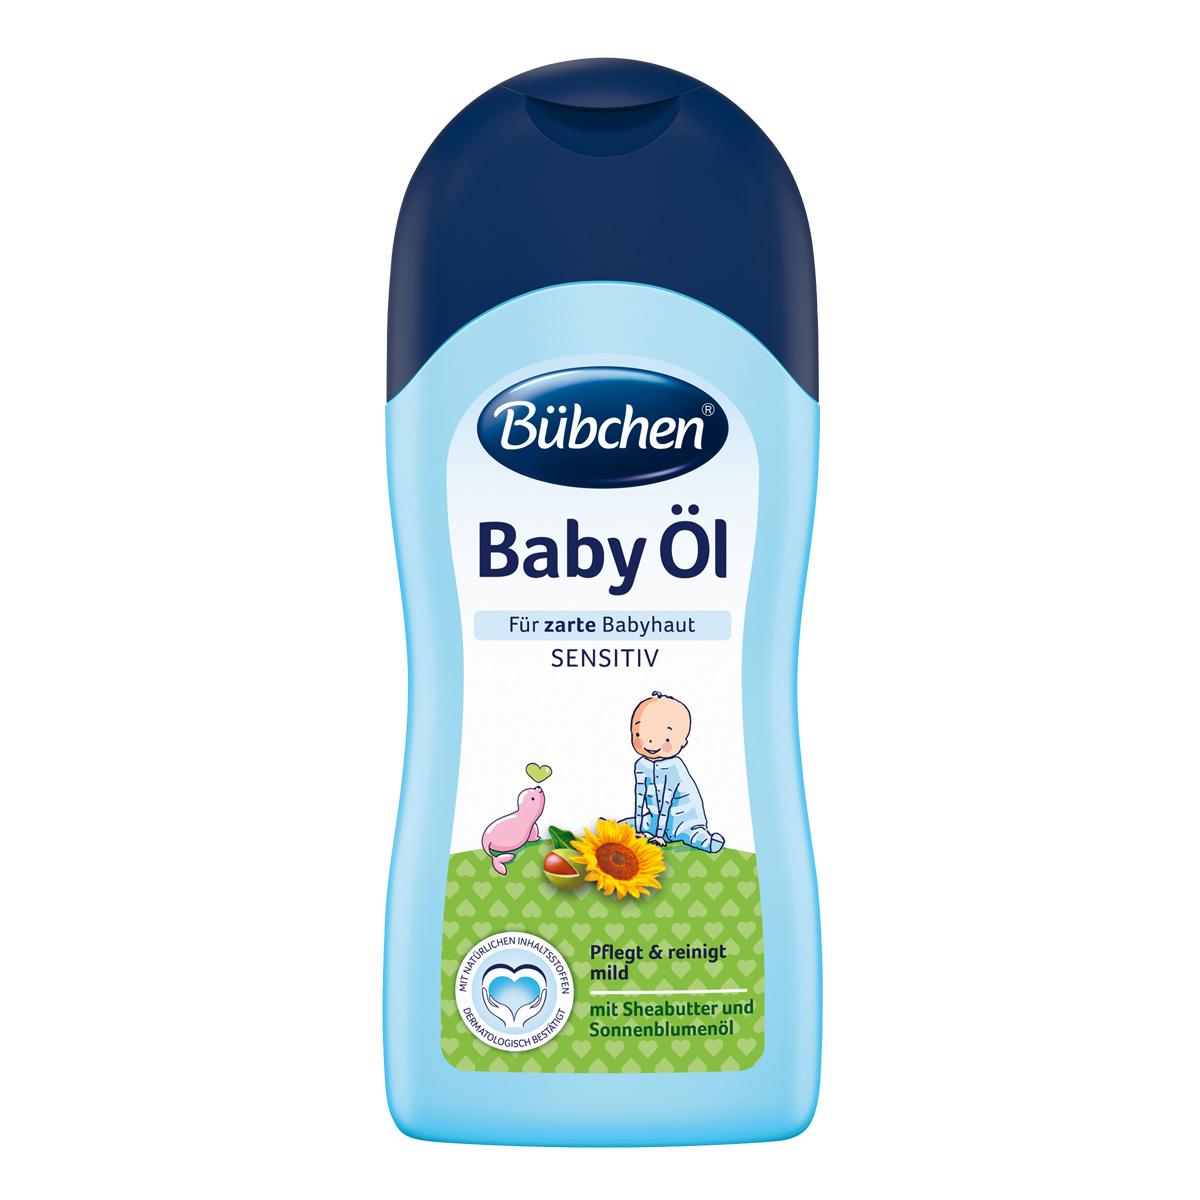 Primary image of Baby Oil